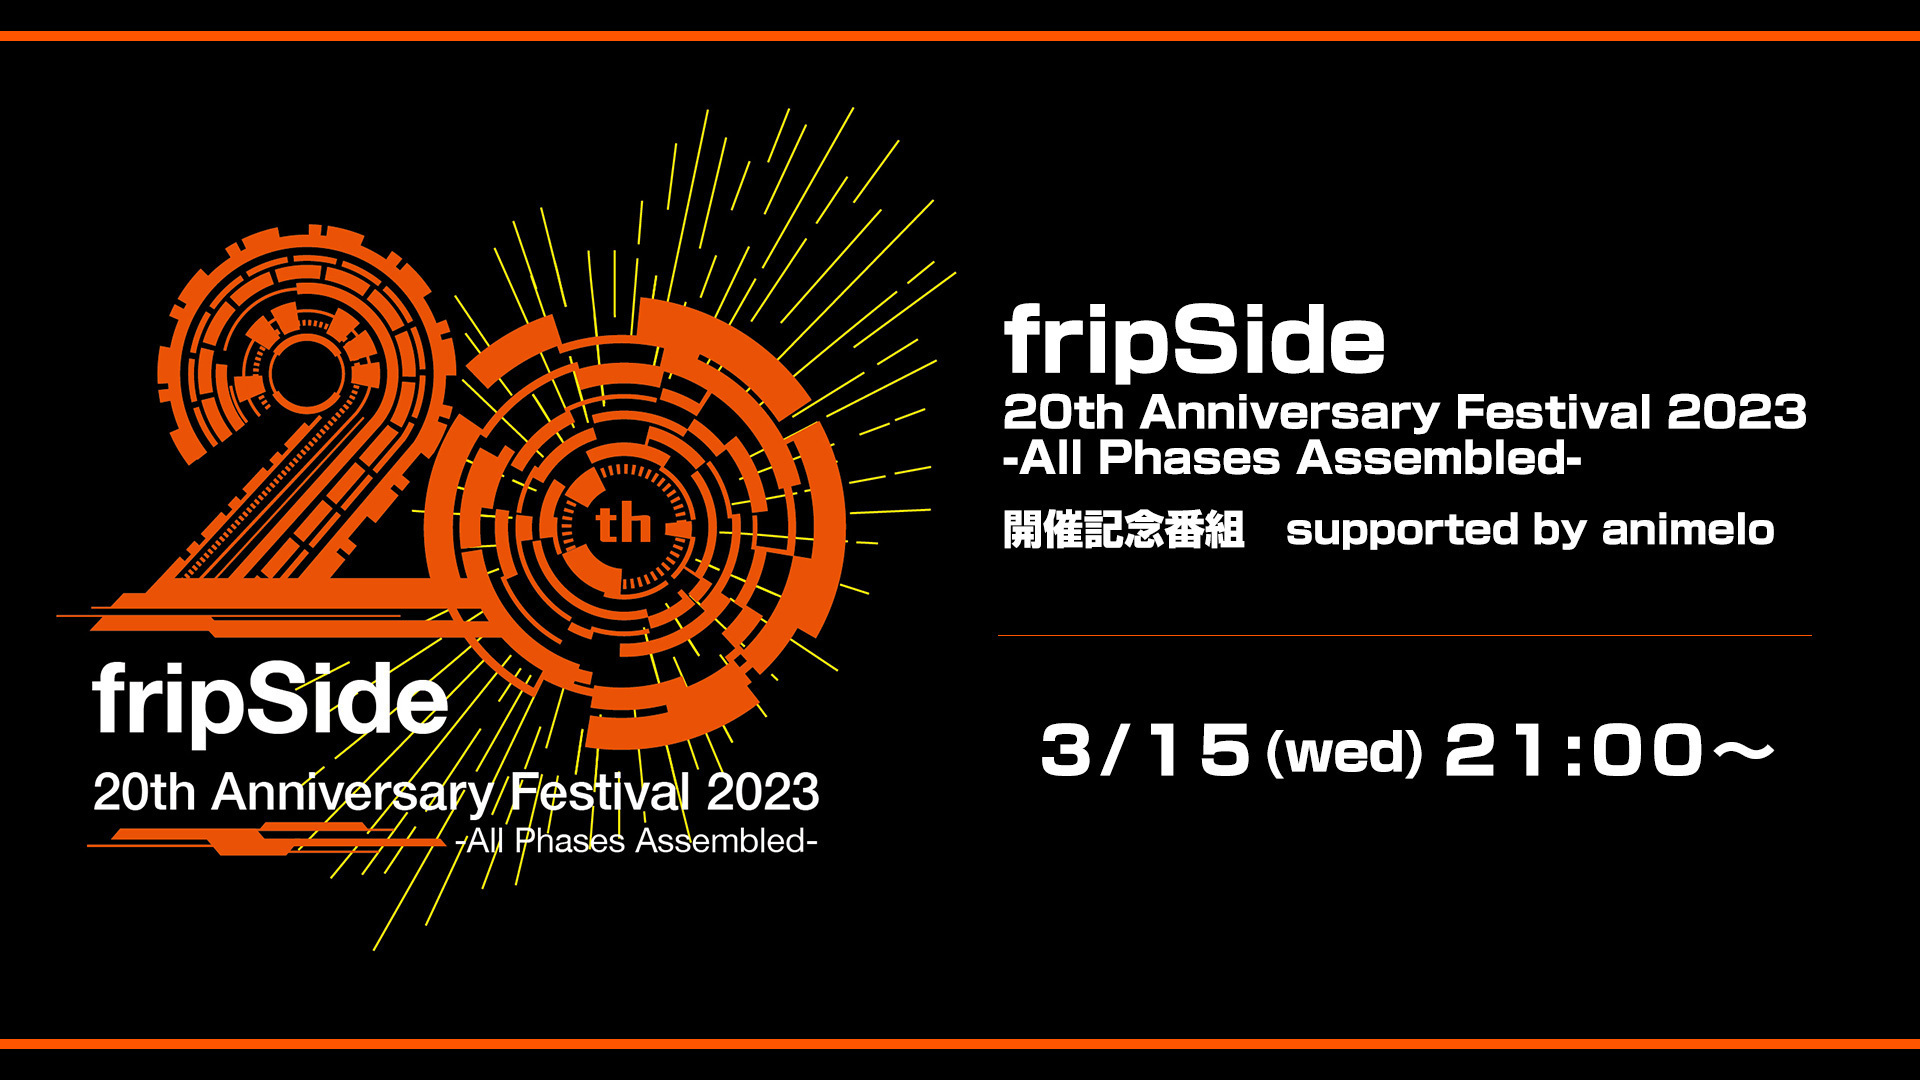 fripSide 20th Anniversary Festival 2023」開催記念番組 supported by 